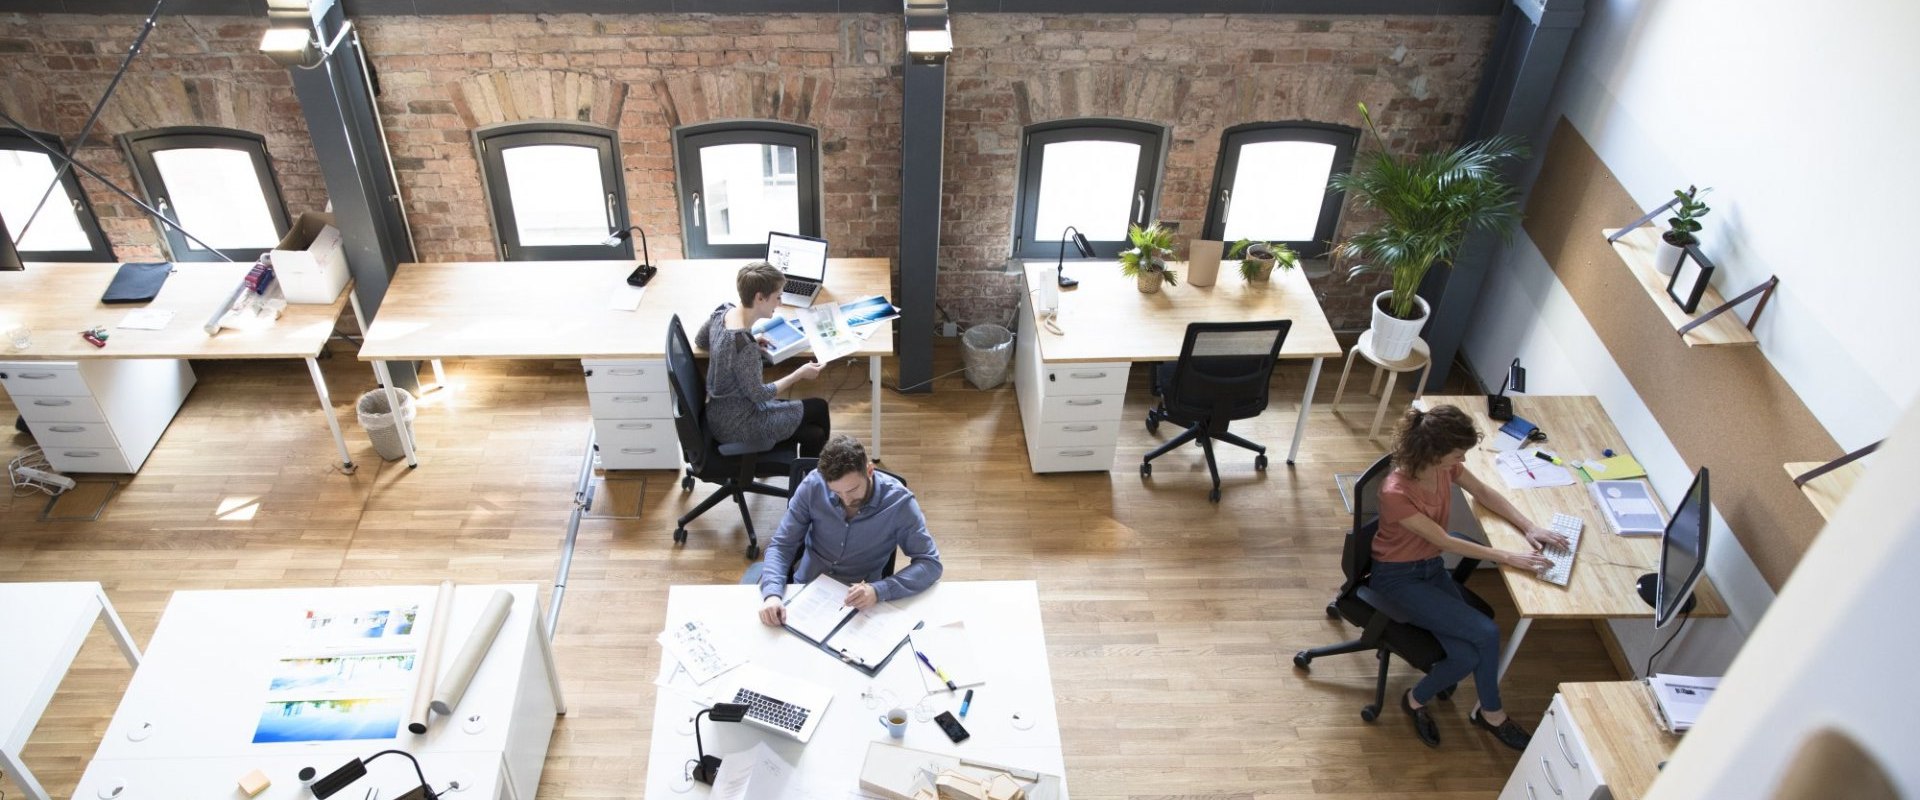 How Much Does It Cost to Upgrade or Expand a Co-Working Office Space?